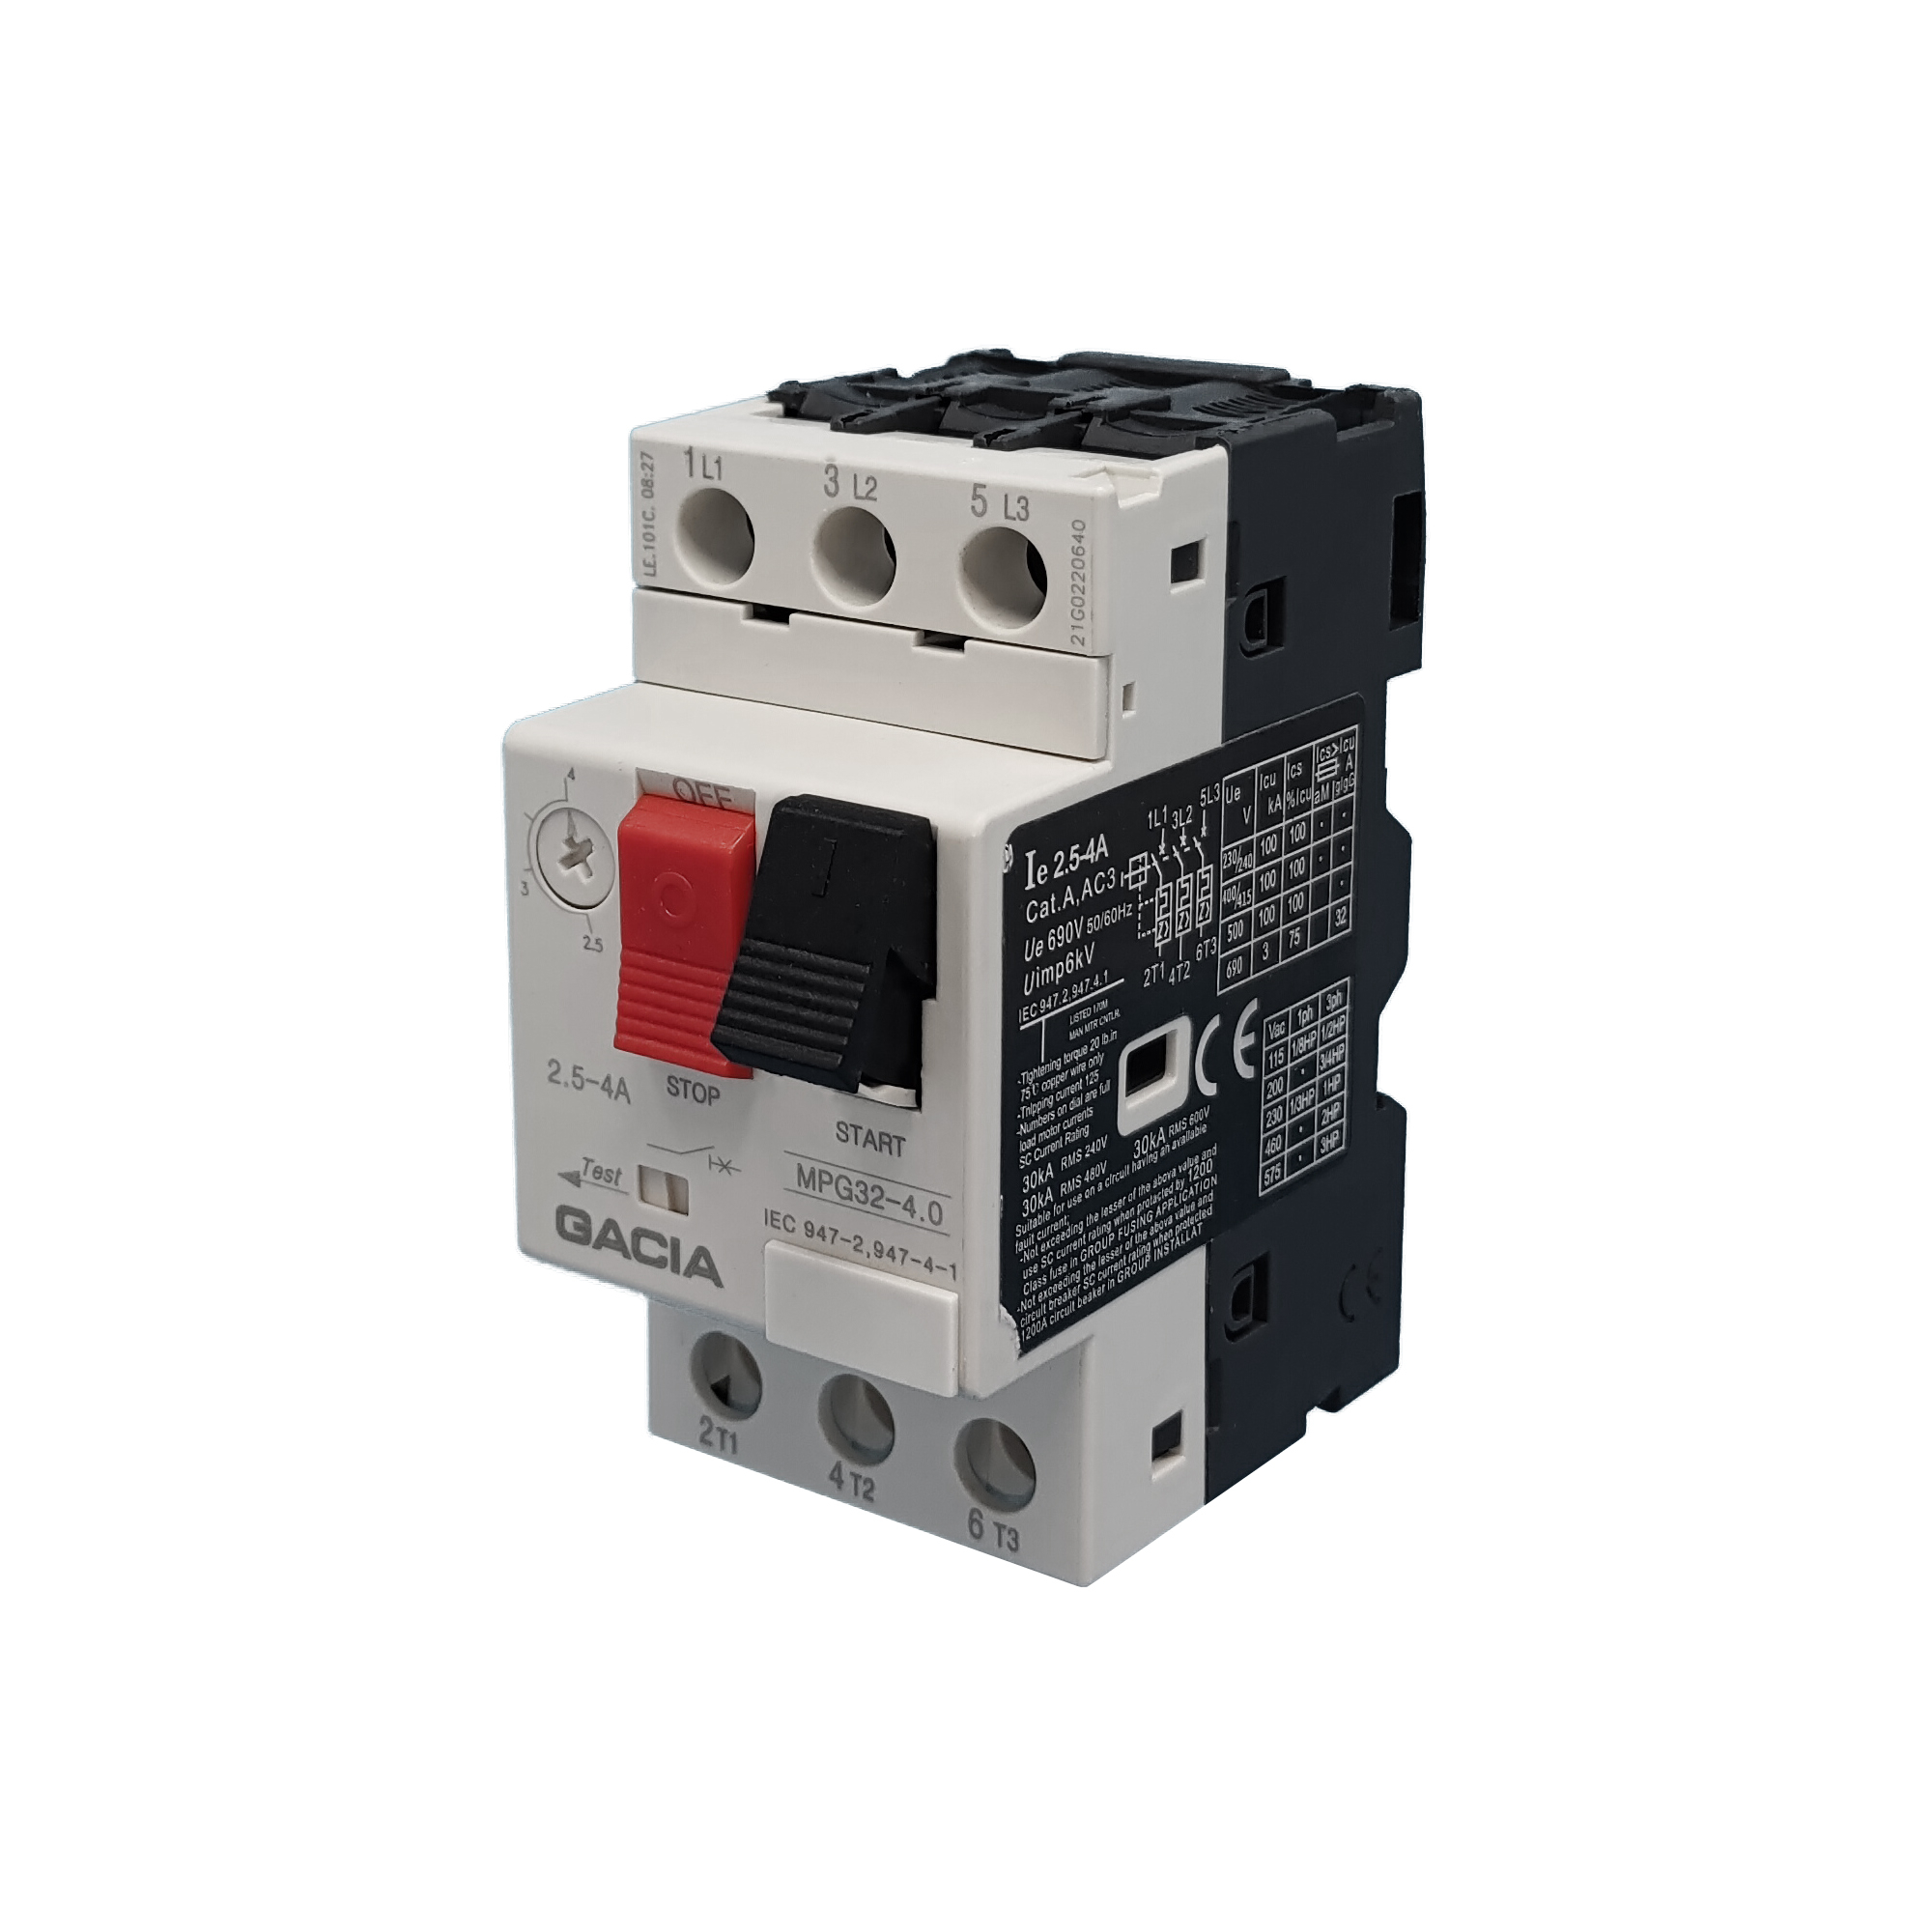 MPG32 6-10A motor protection circuit breaker